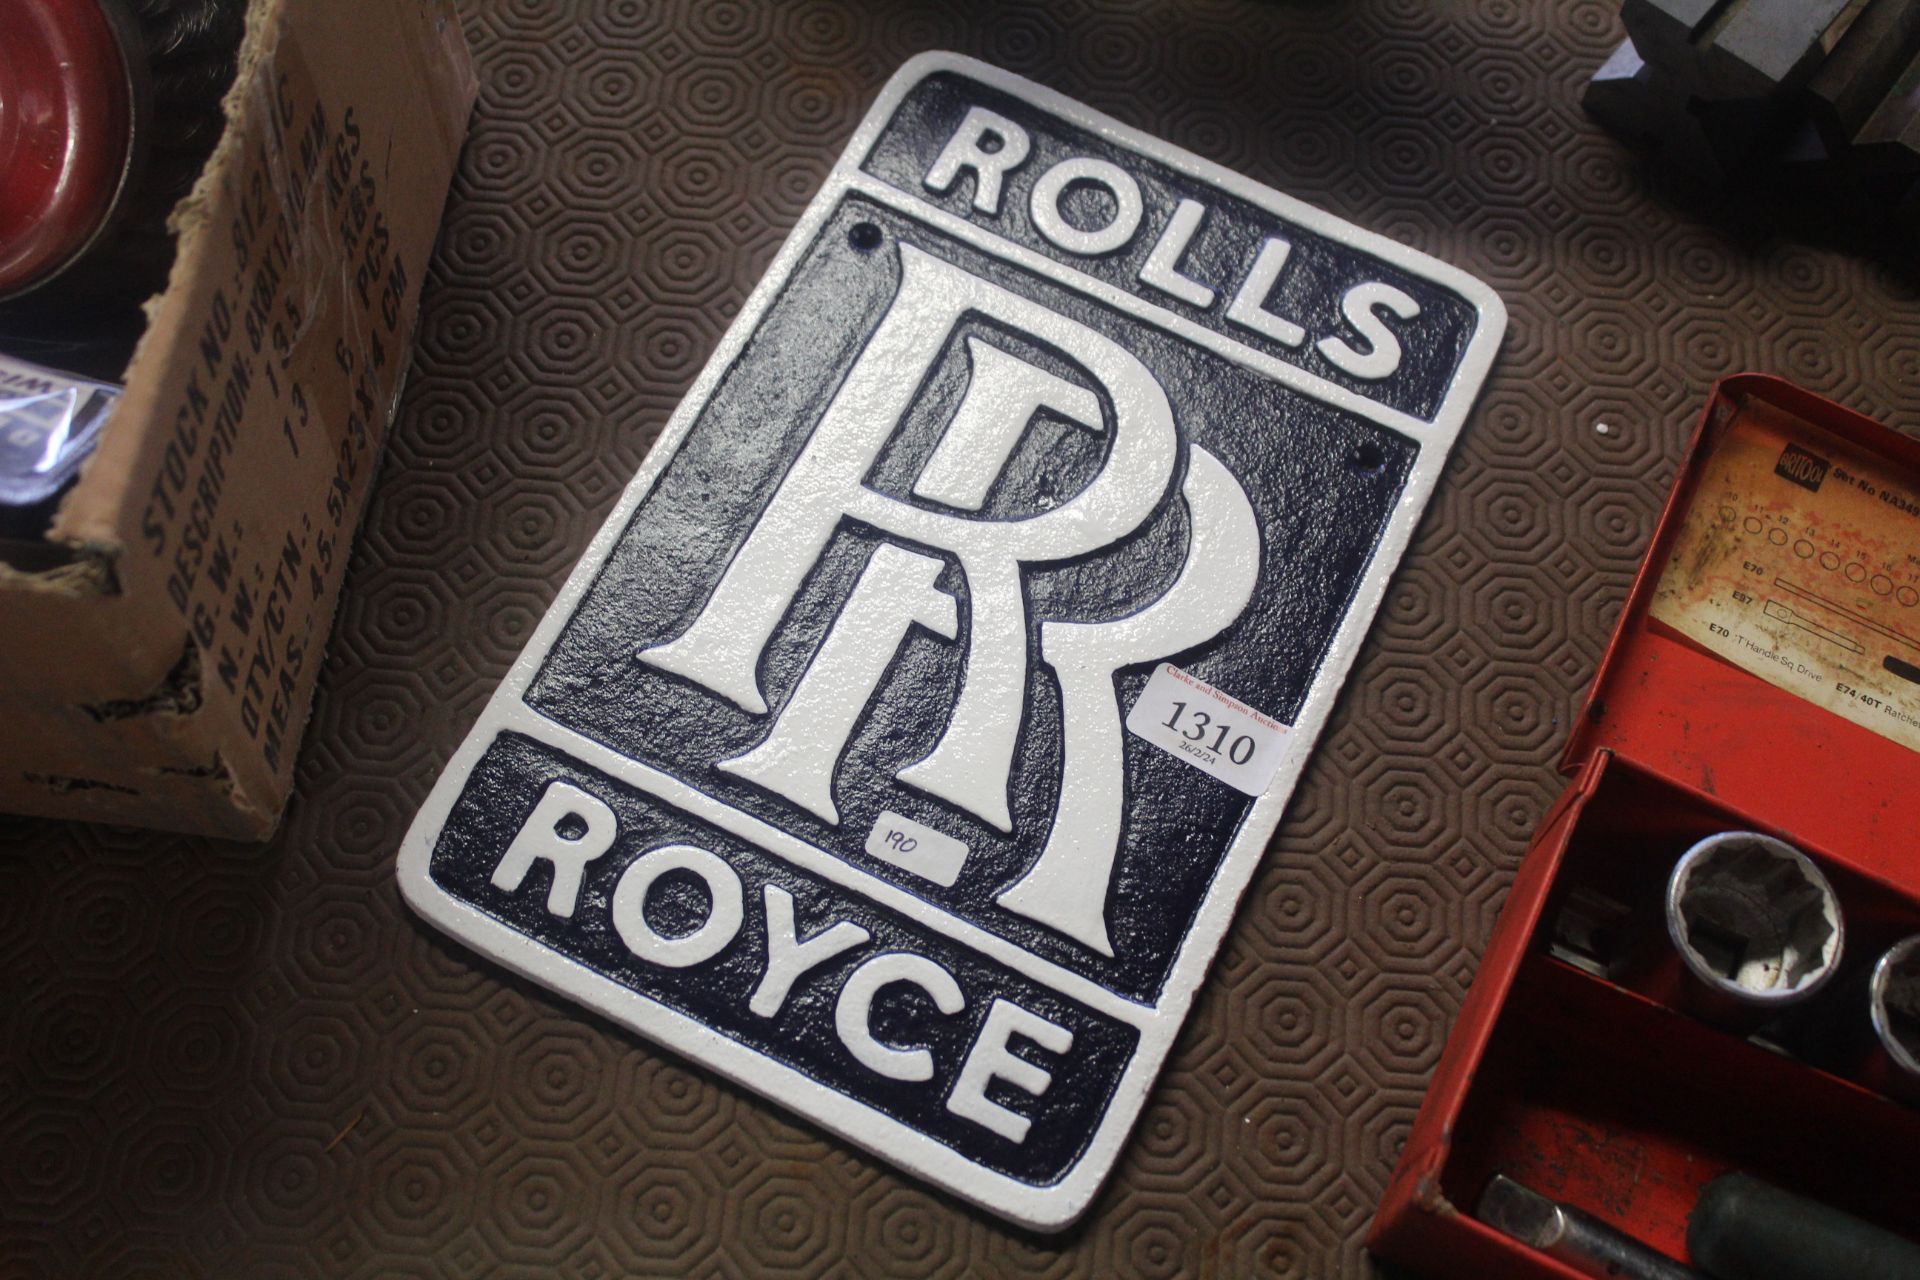 A painted cast iron sign for "Rolls Royce" (190)